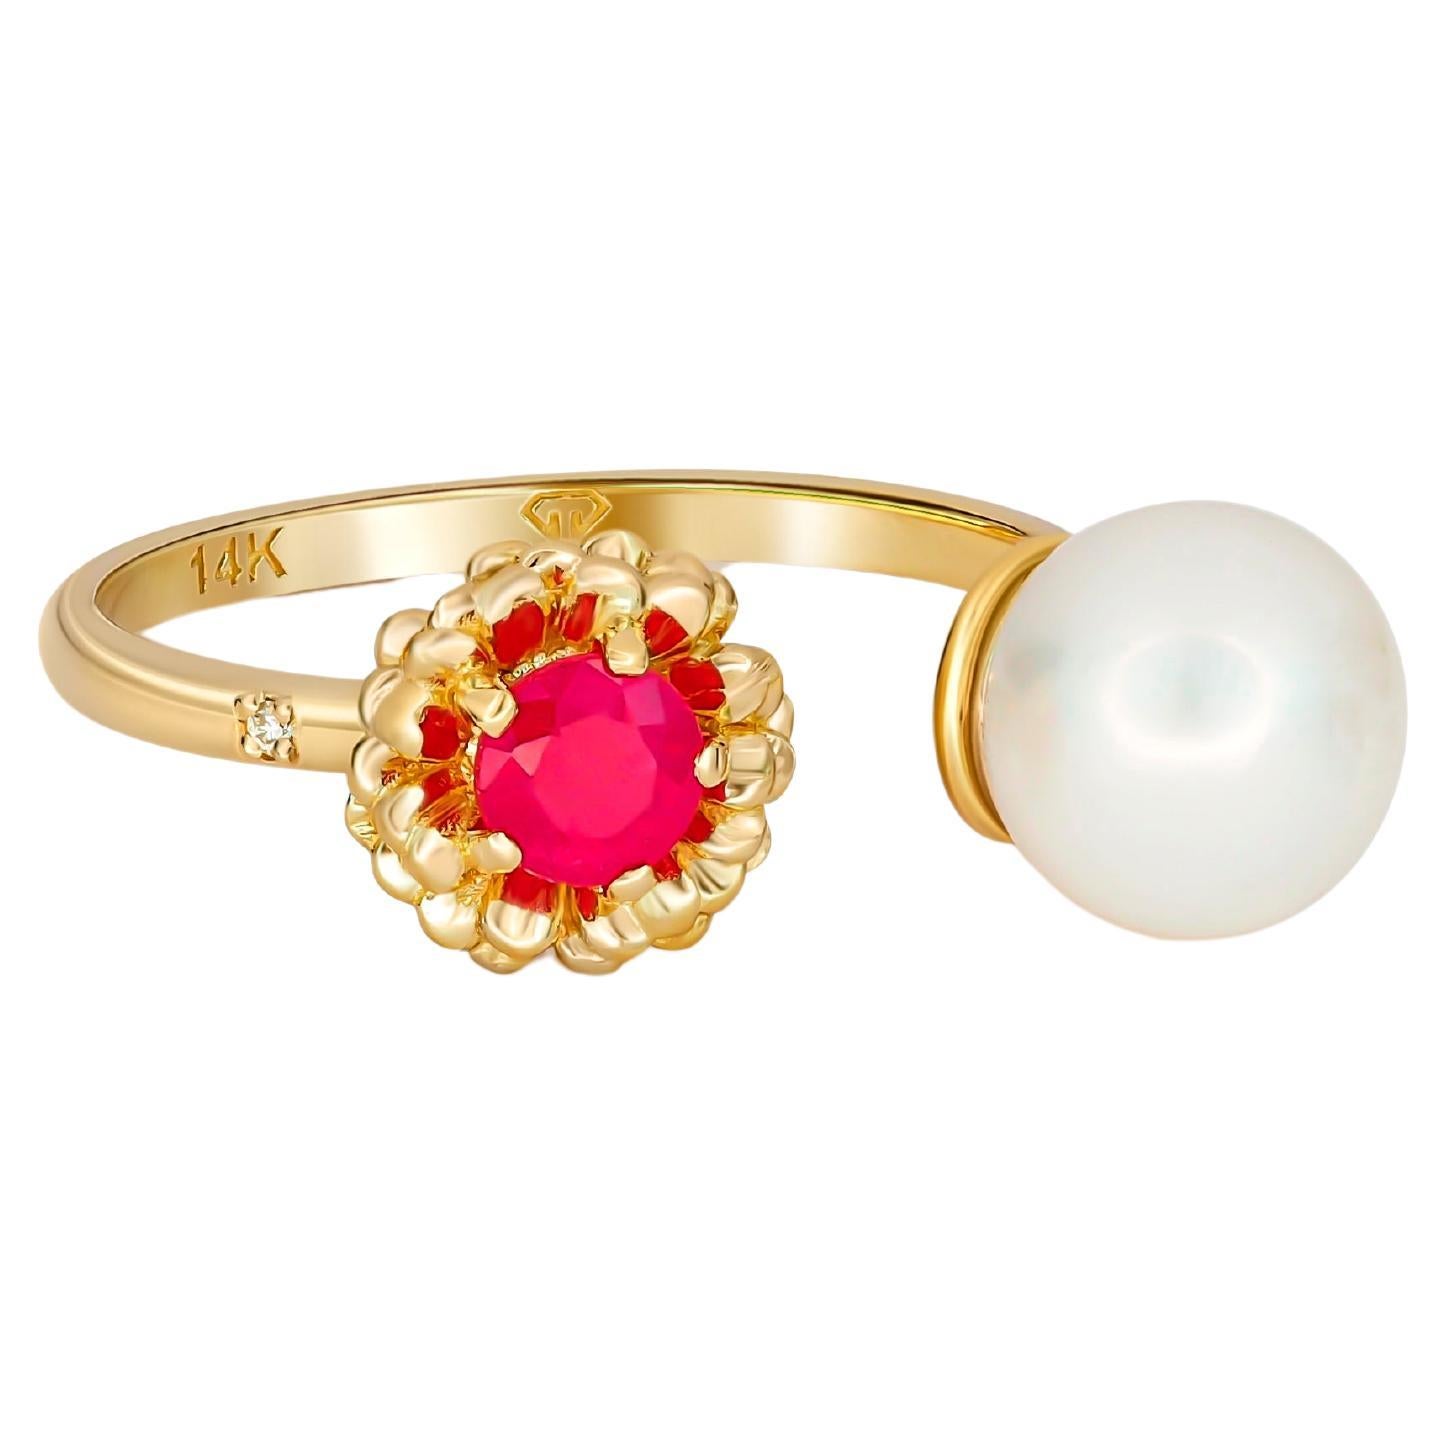 Daisy ring with ruby.  For Sale